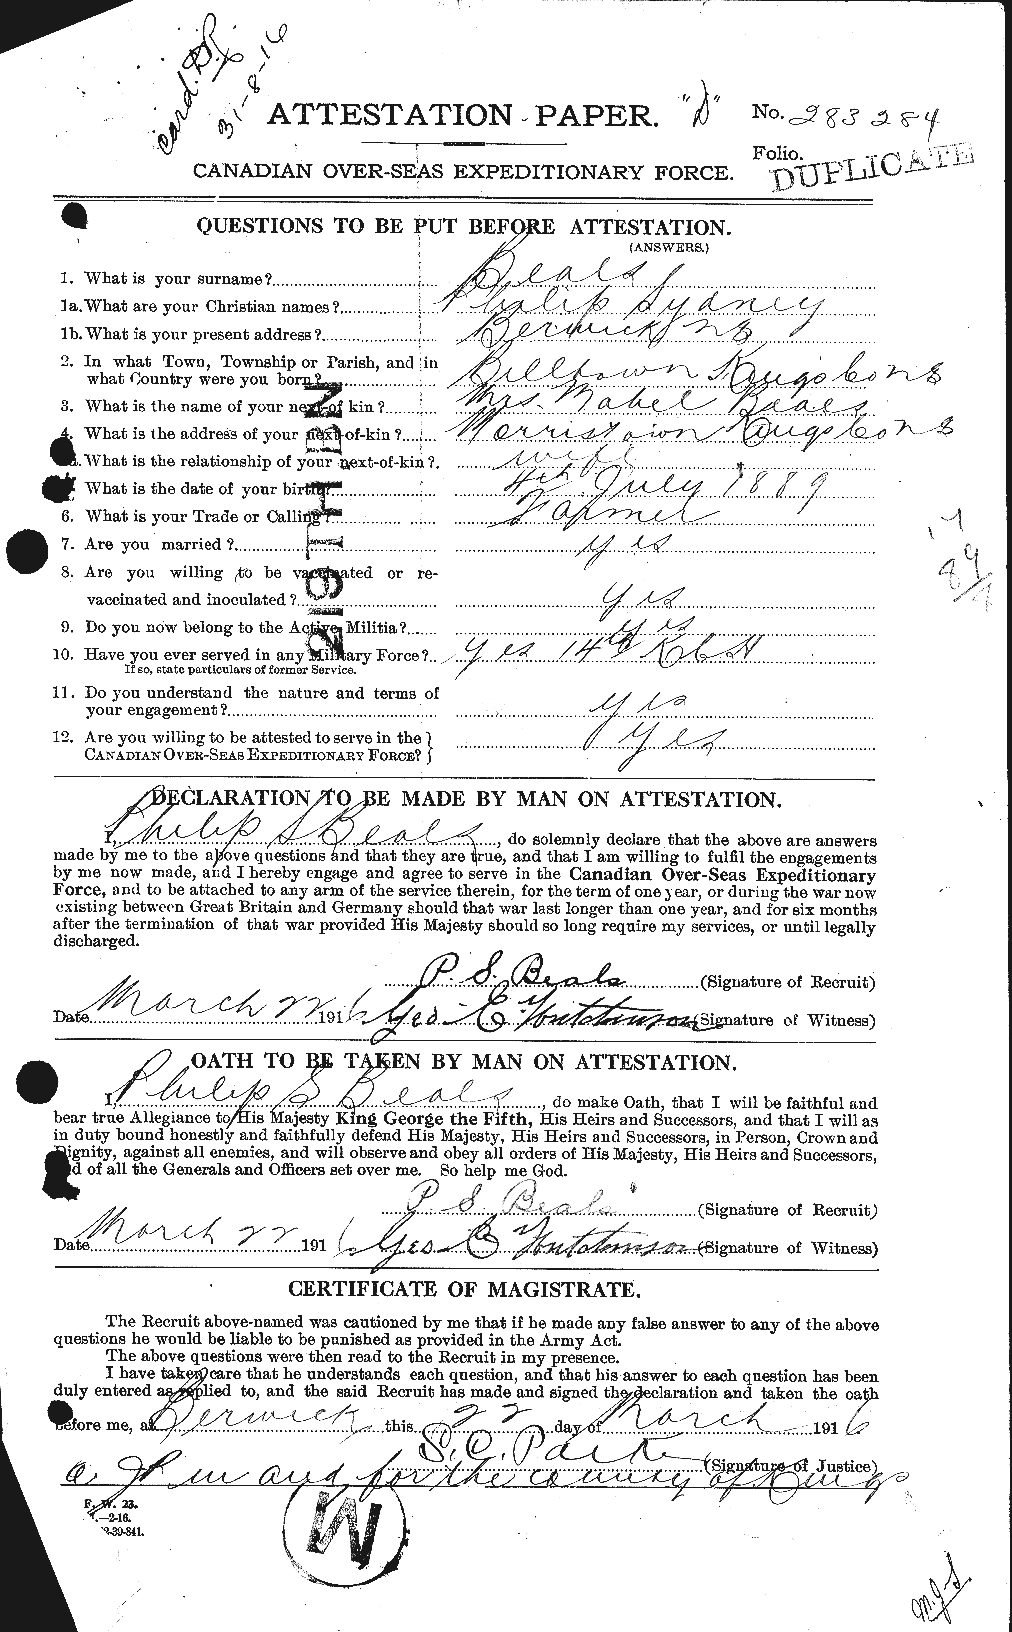 Personnel Records of the First World War - CEF 235394a